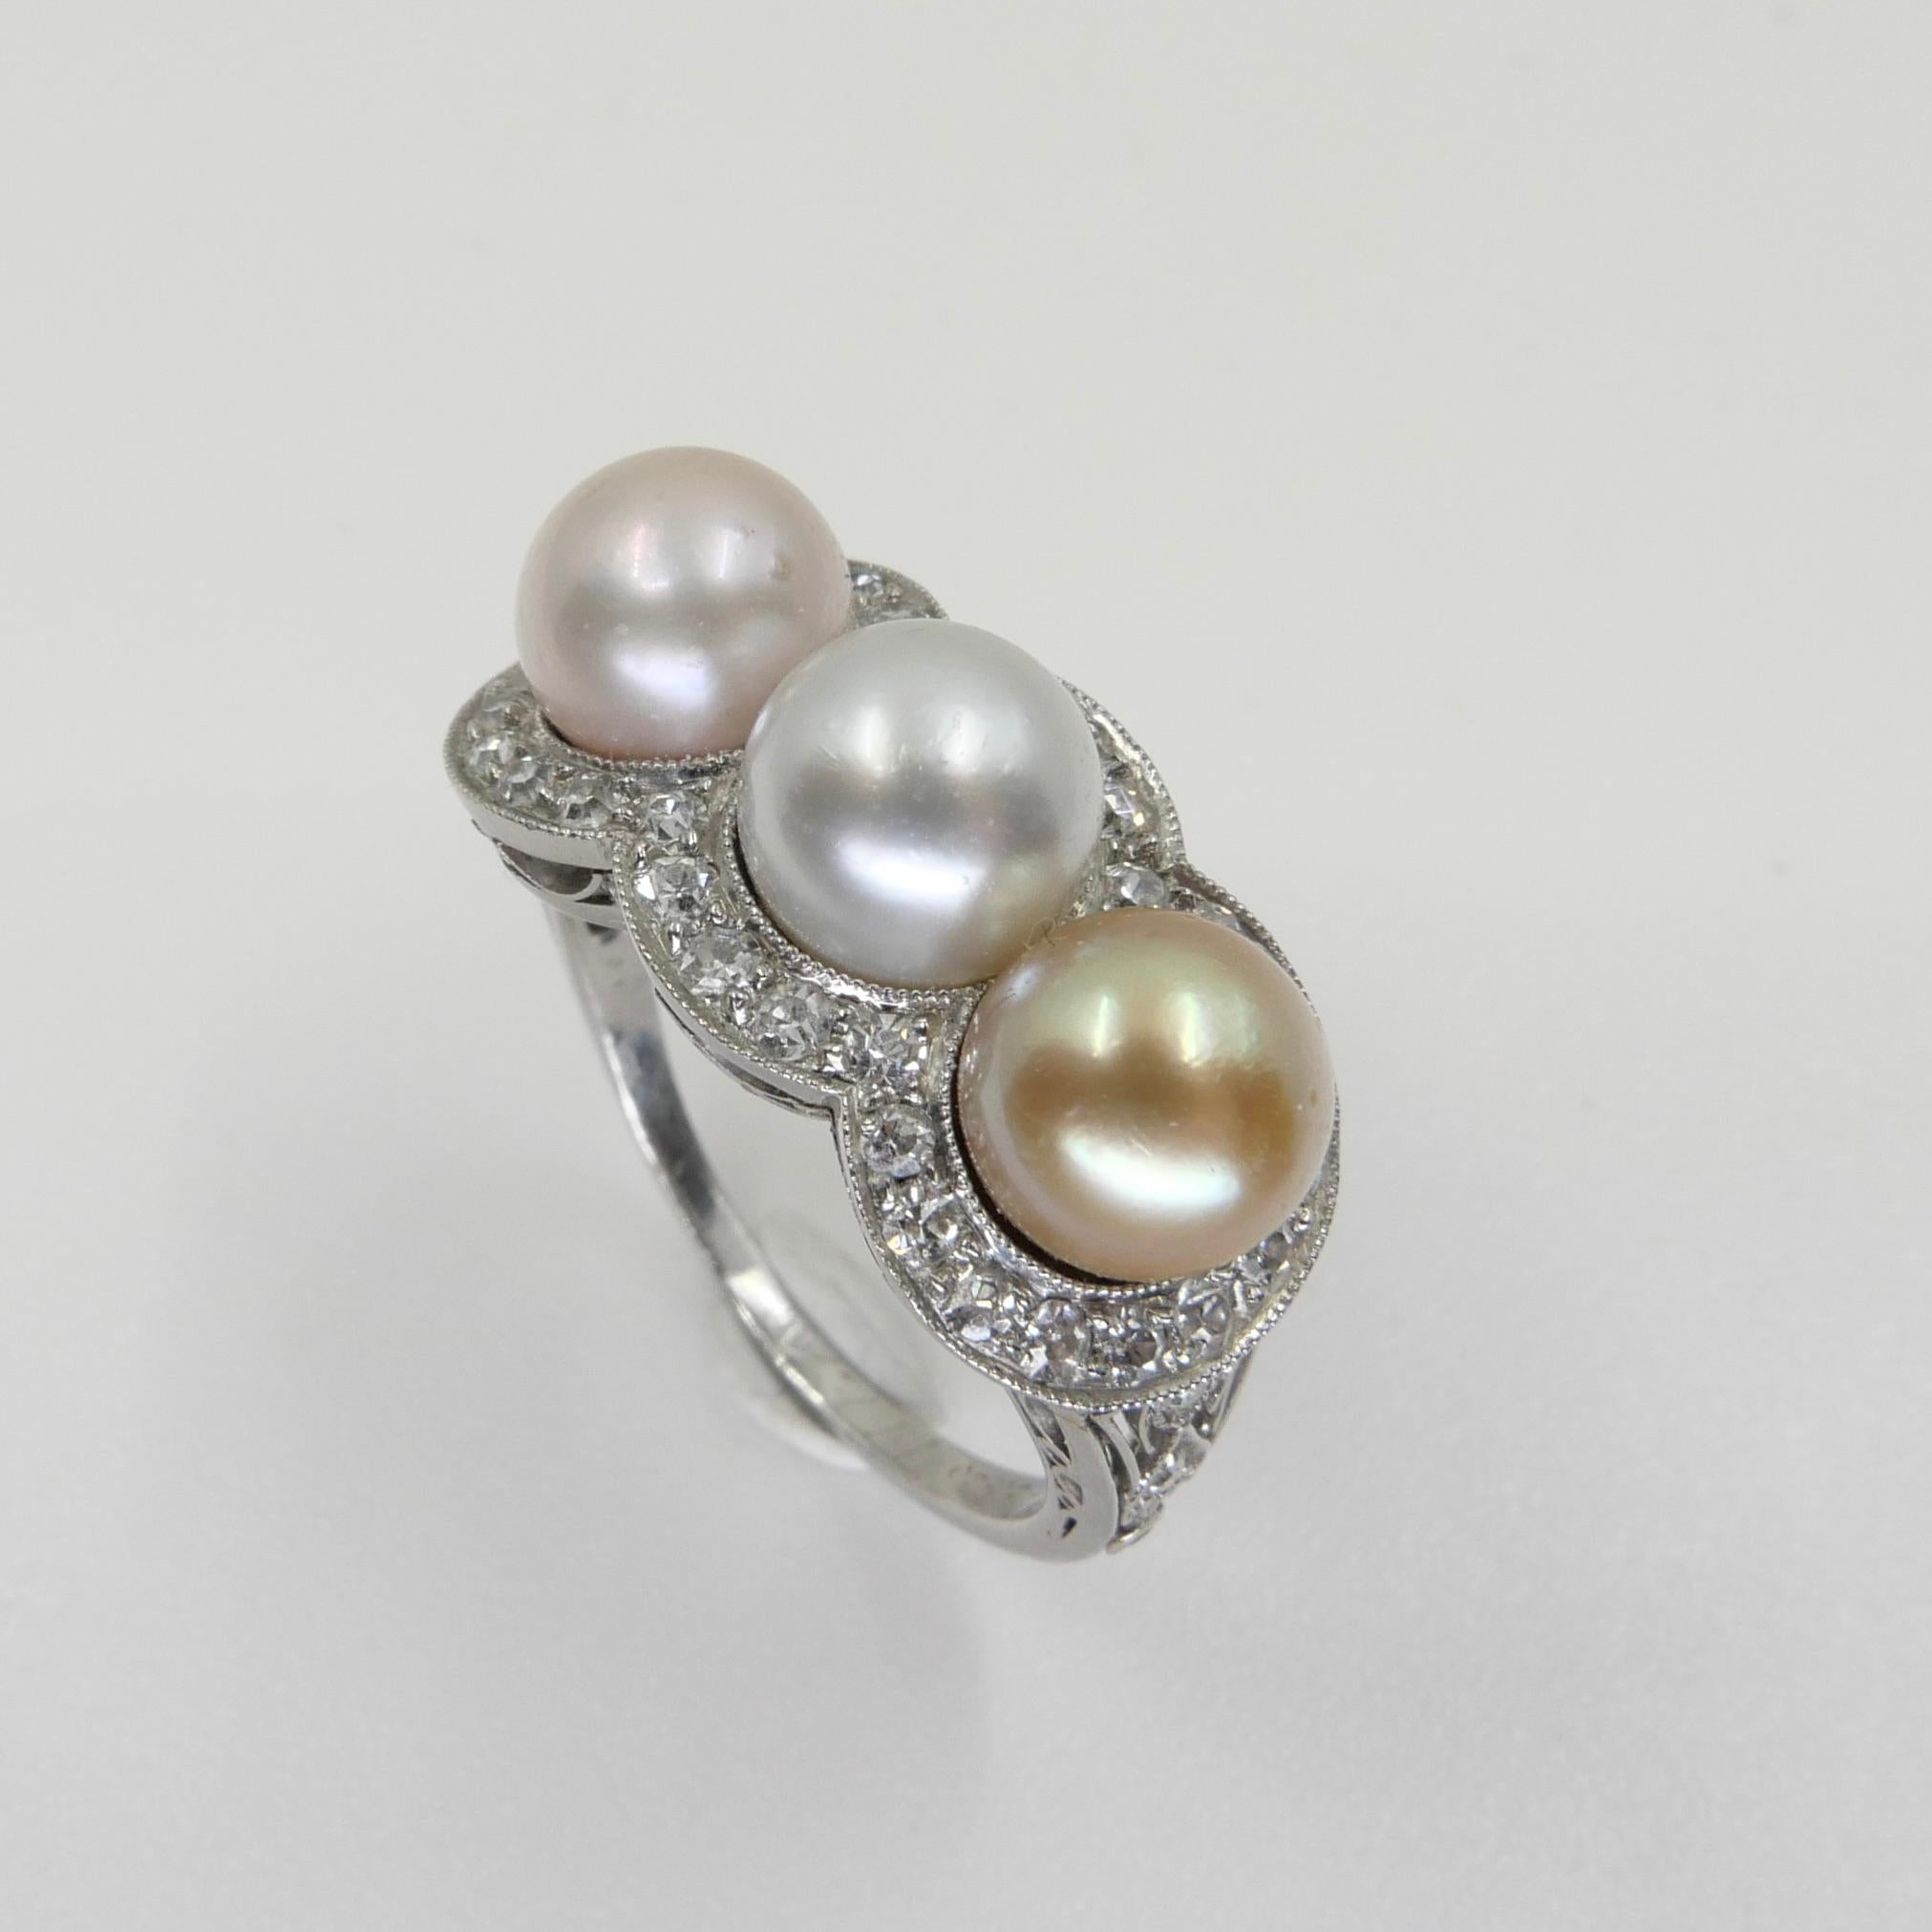 Belle Époque J E Caldwell Belle Epoque Certified 3 Natural Colored Pearls and Diamond Ring